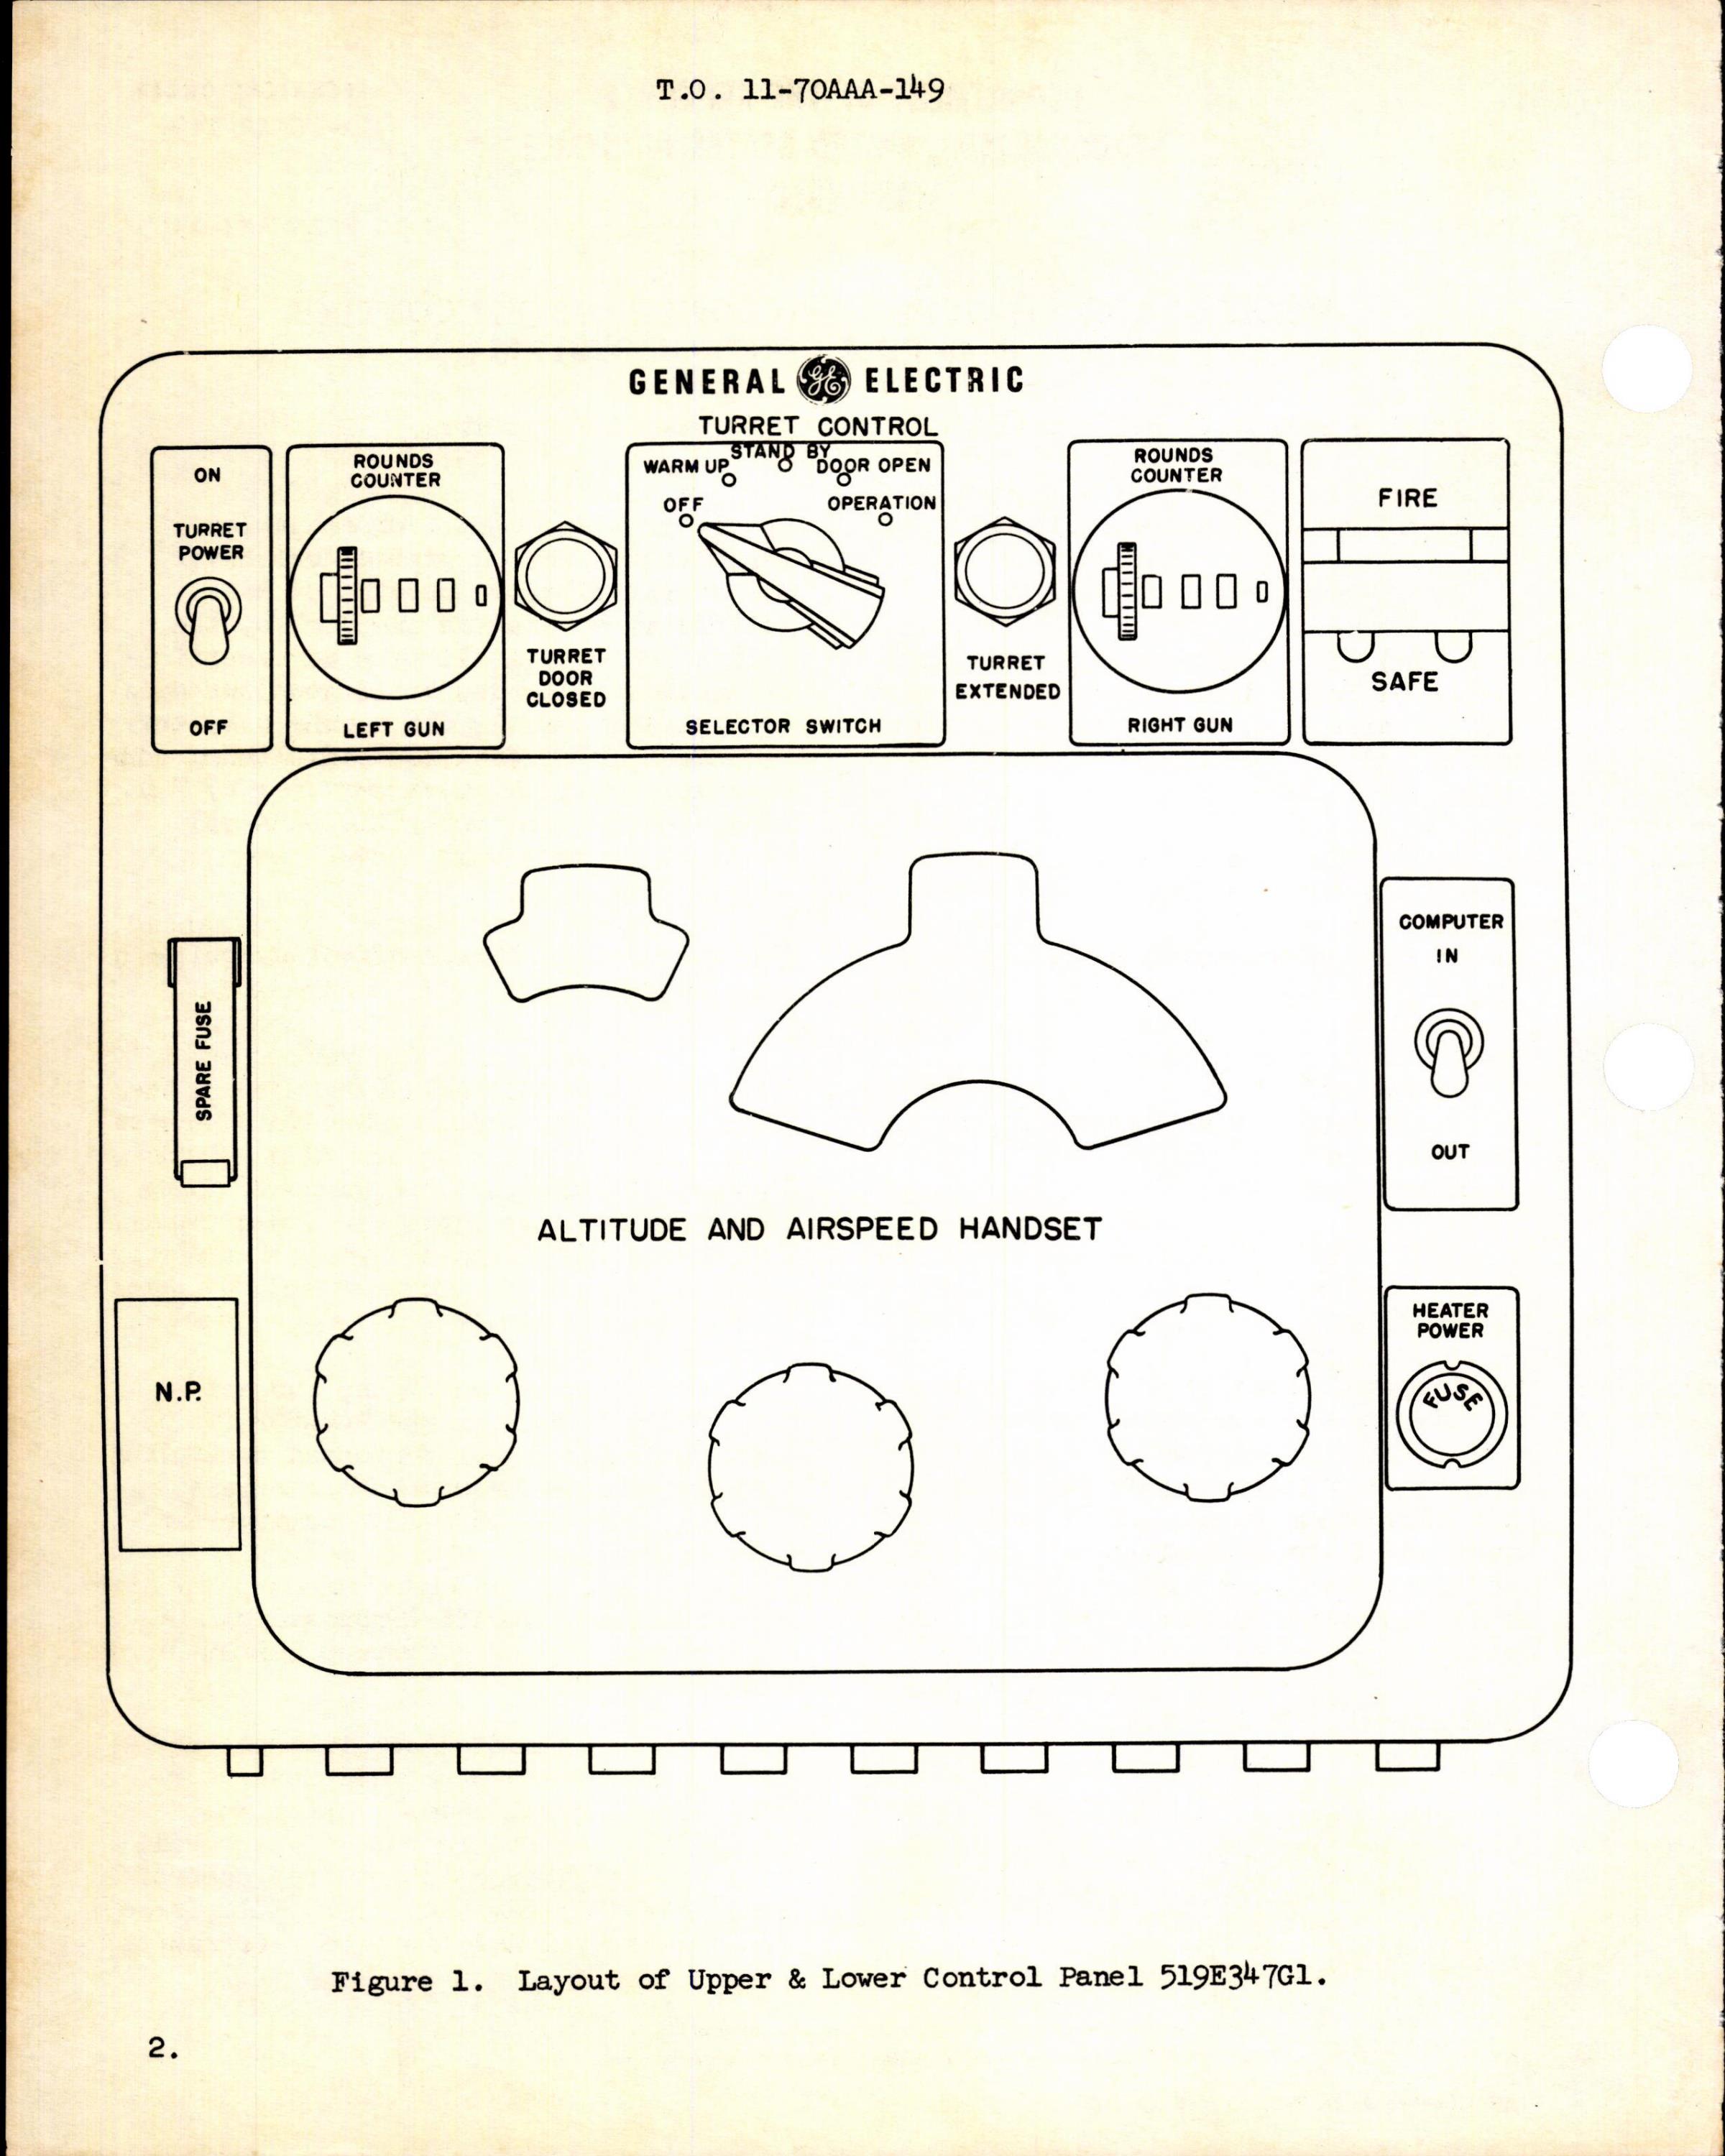 Sample page 2 from AirCorps Library document: Modification of Upper and Lower System Control Panel for B-36 Fire Control System